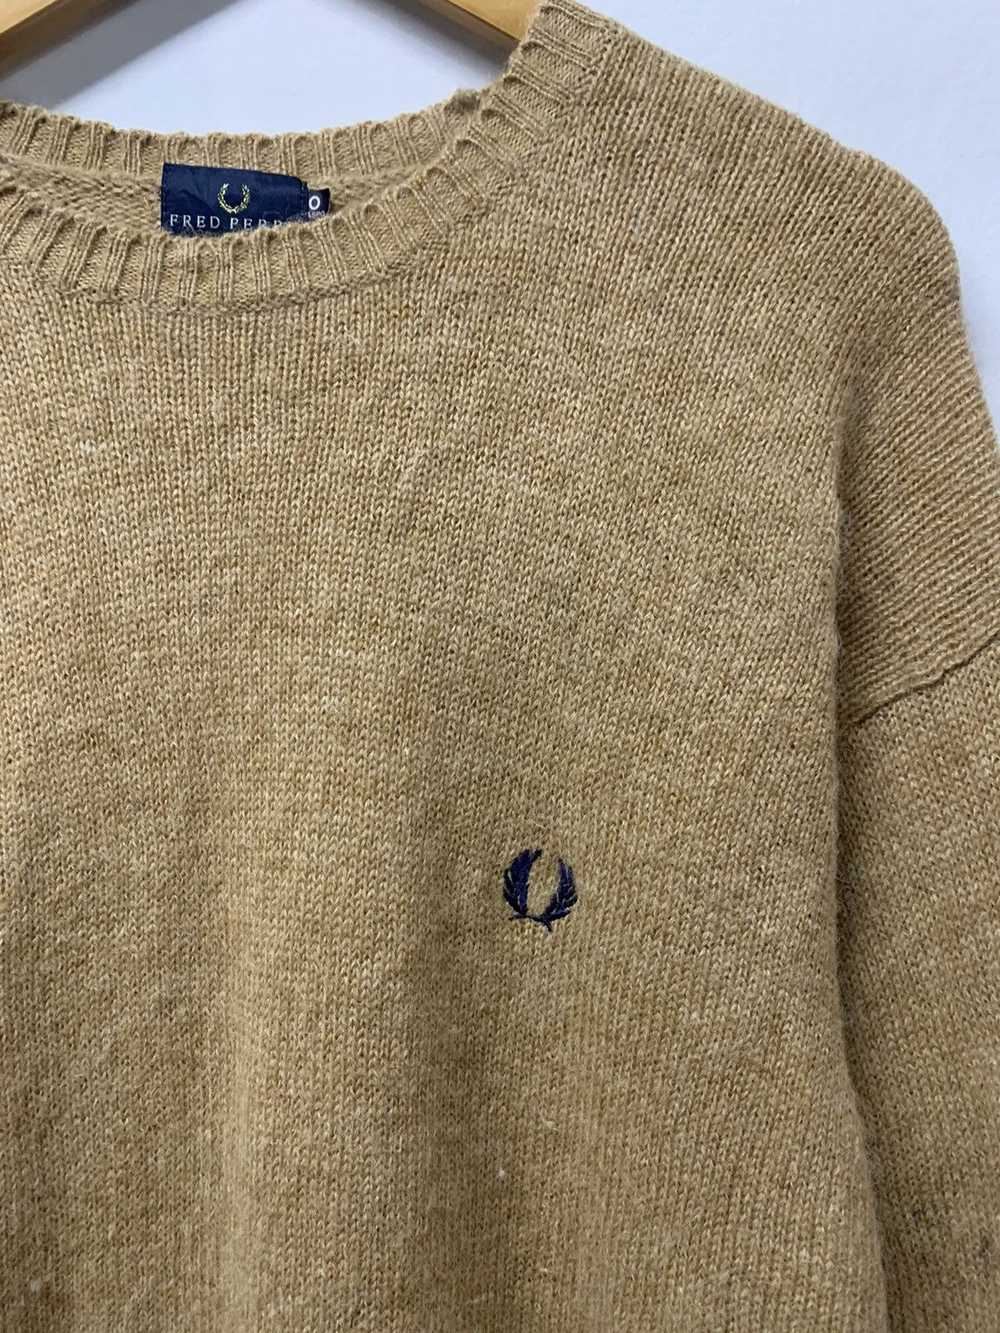 Fred Perry × Japanese Brand Fred Perry Knitwear W… - image 3